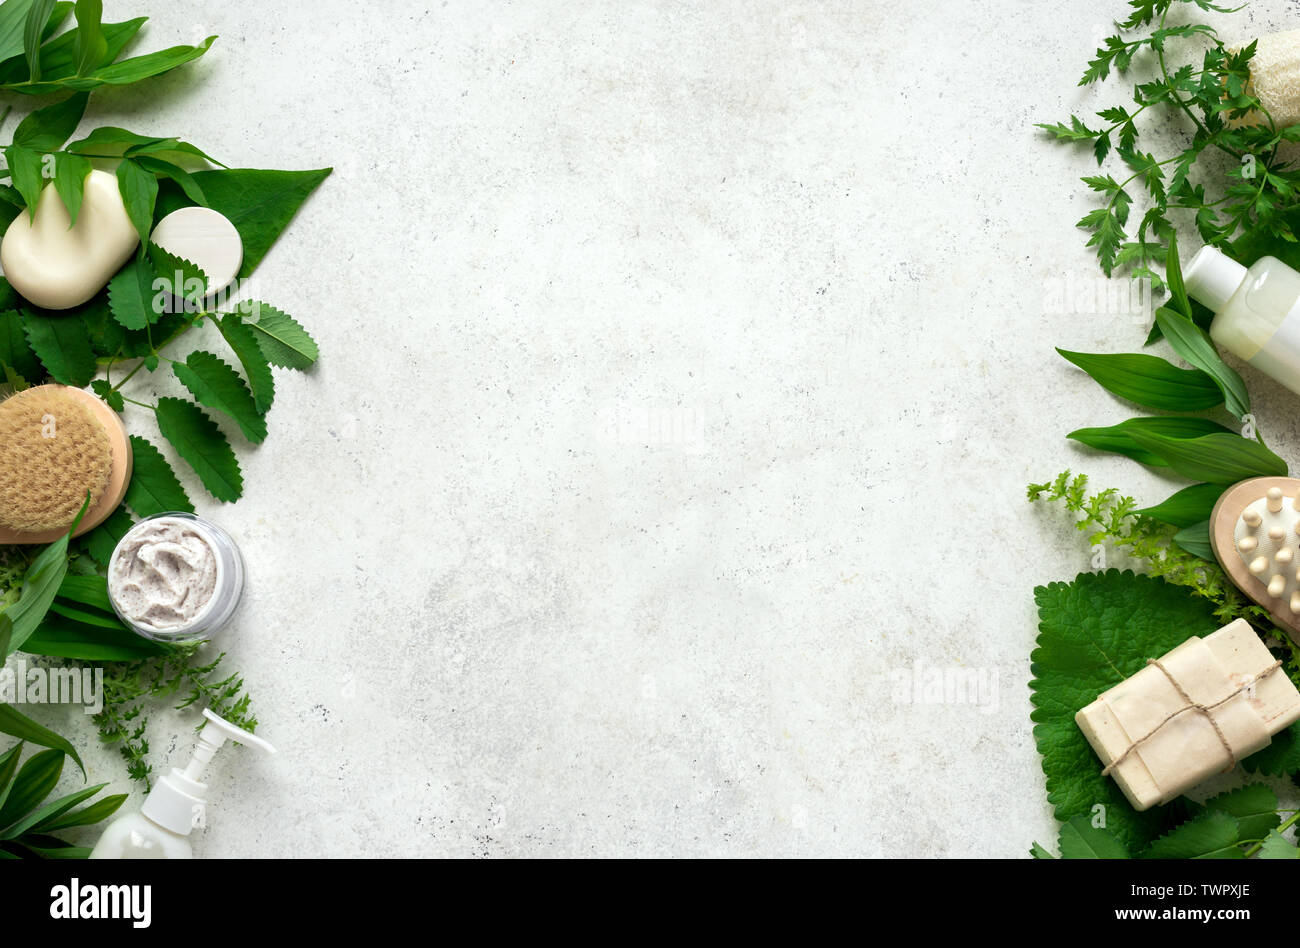 Natural cosmetics and green leaves on white stone background, copy space. Natural  organic skincare, bio research and healthy lifestyle concept Stock Photo -  Alamy